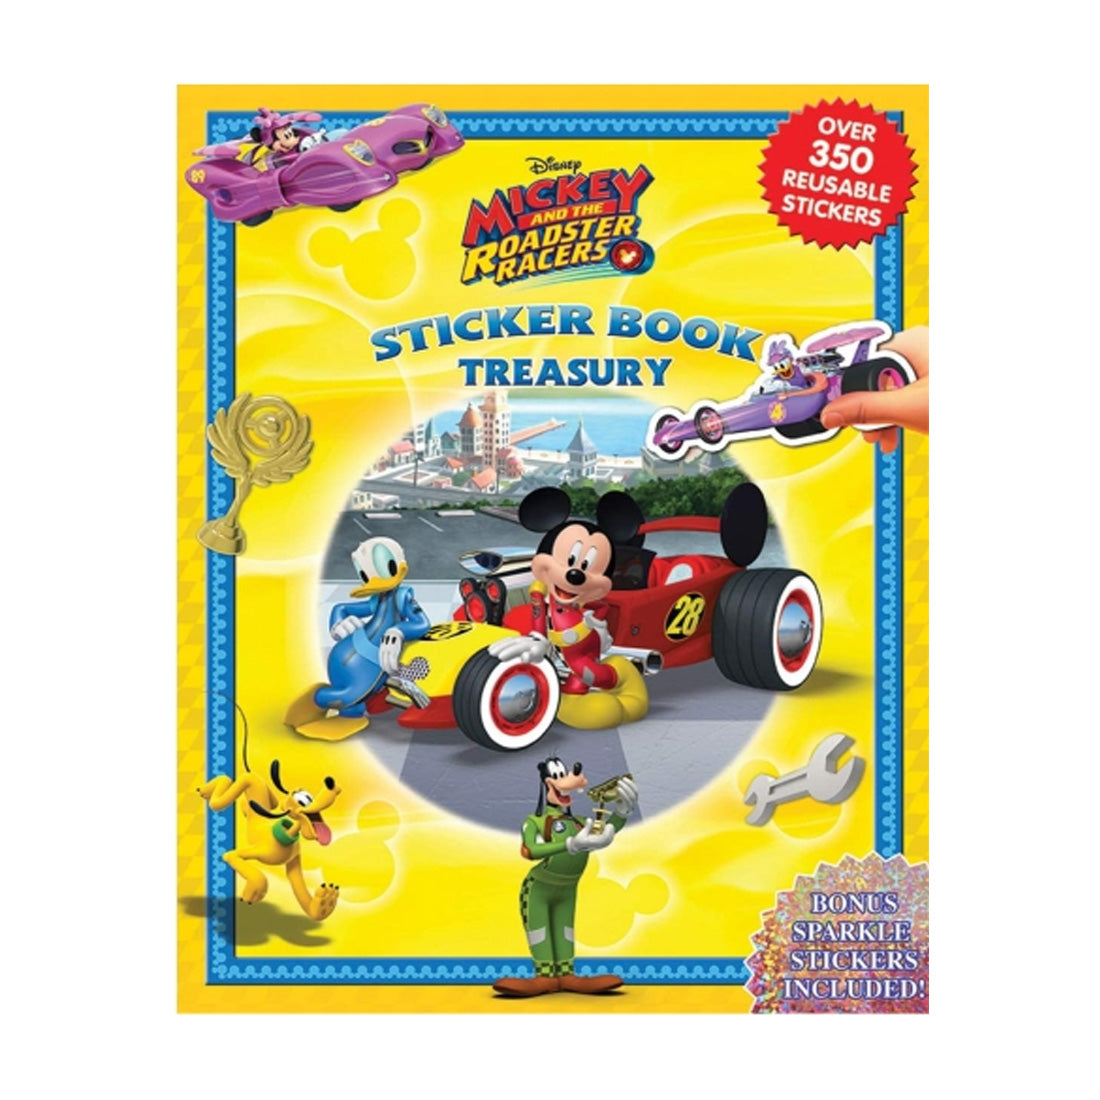 Sticker Book Treasury - Disney Mickey And The Roadster Racers